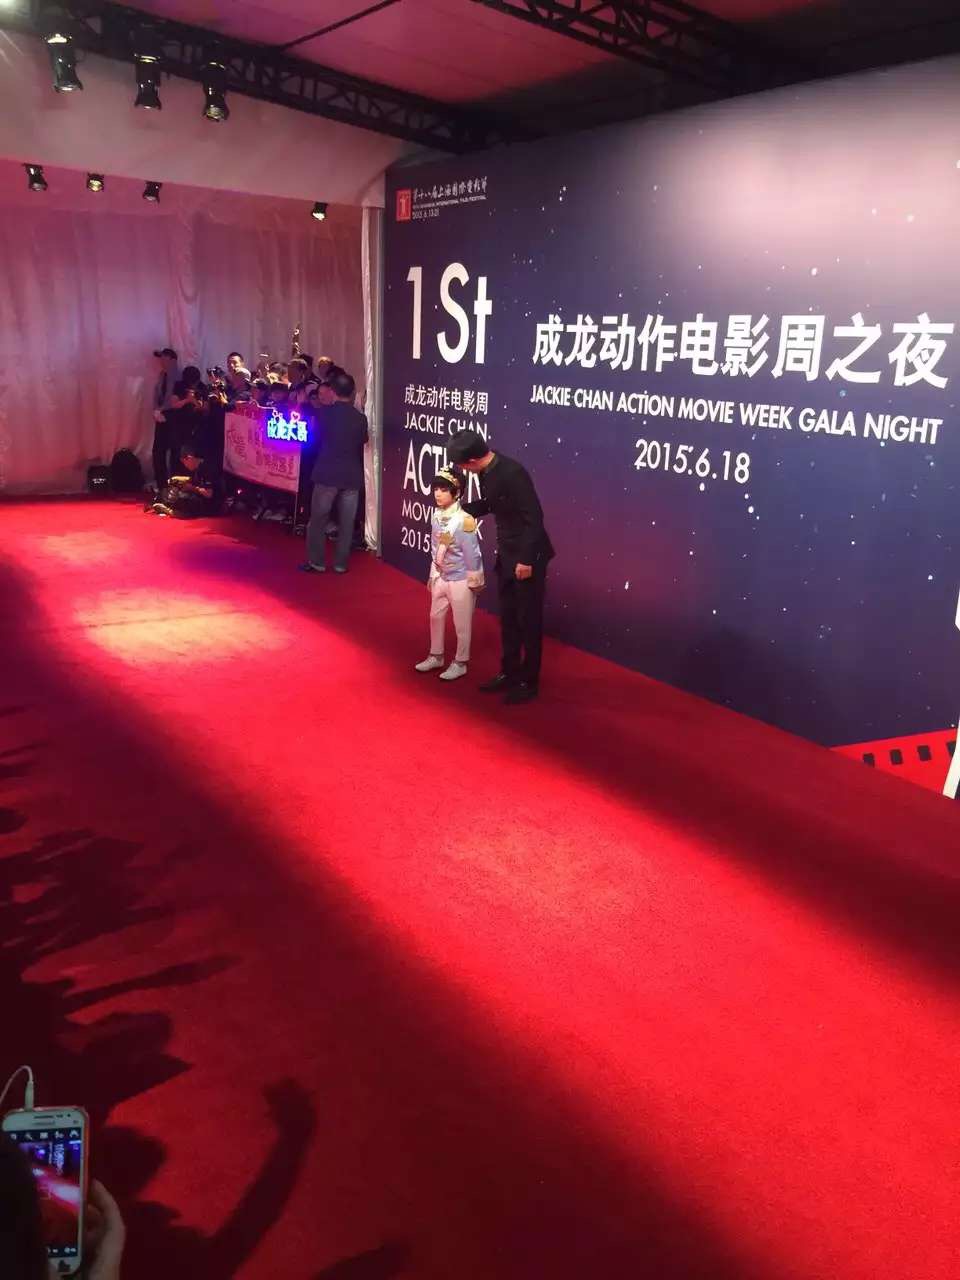 Jozef Waite (西蒙子) being introduced to the crowd at the Shanghai International Film Festival 2015 - Jackie Chan Action Movie Week Gala Night.